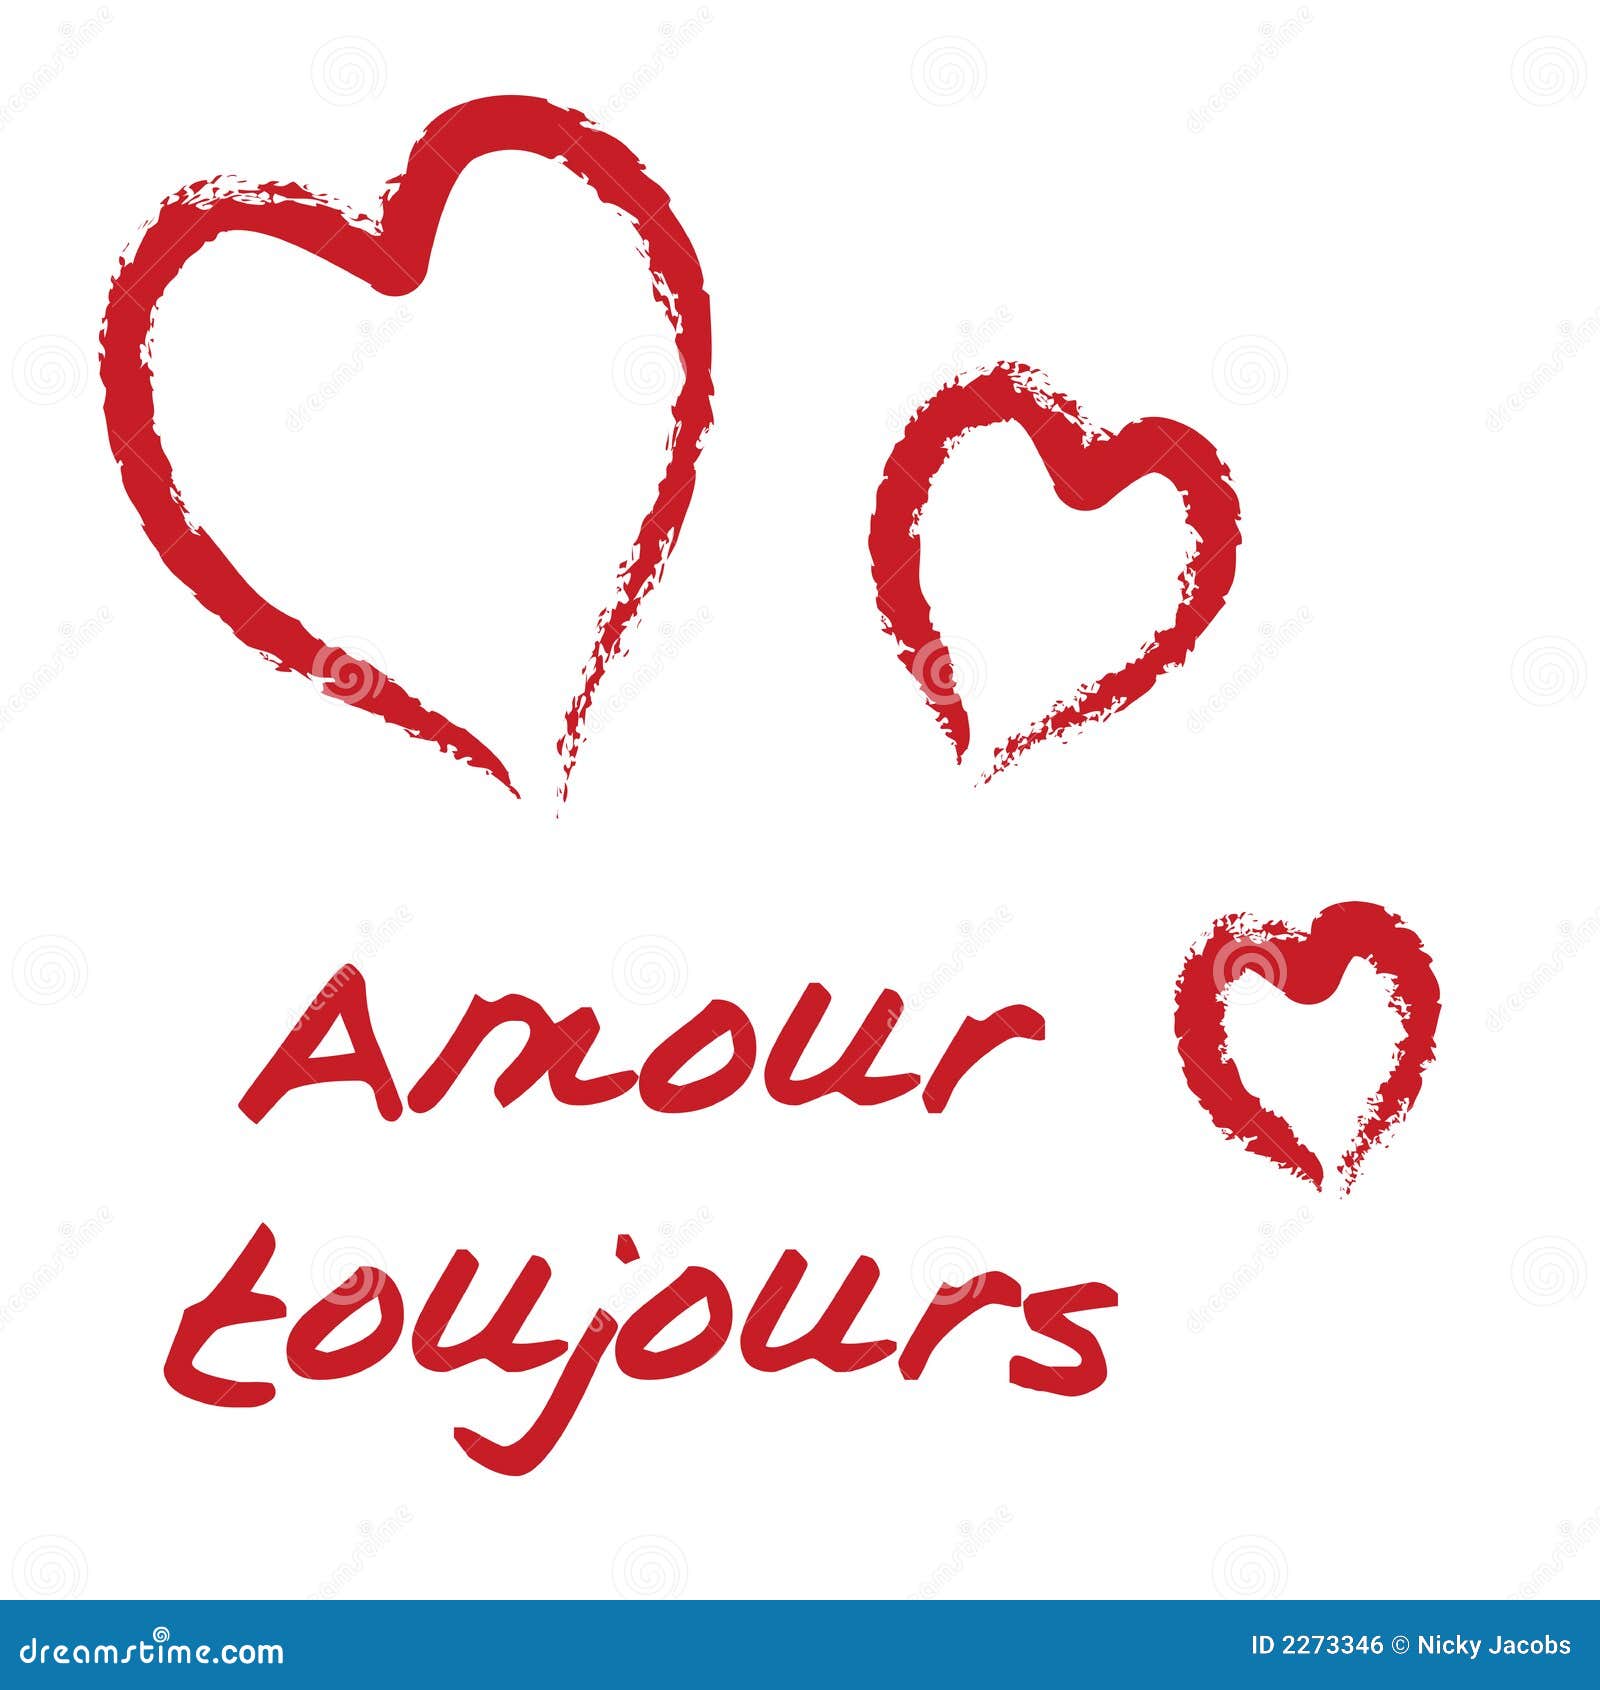 amour toujours